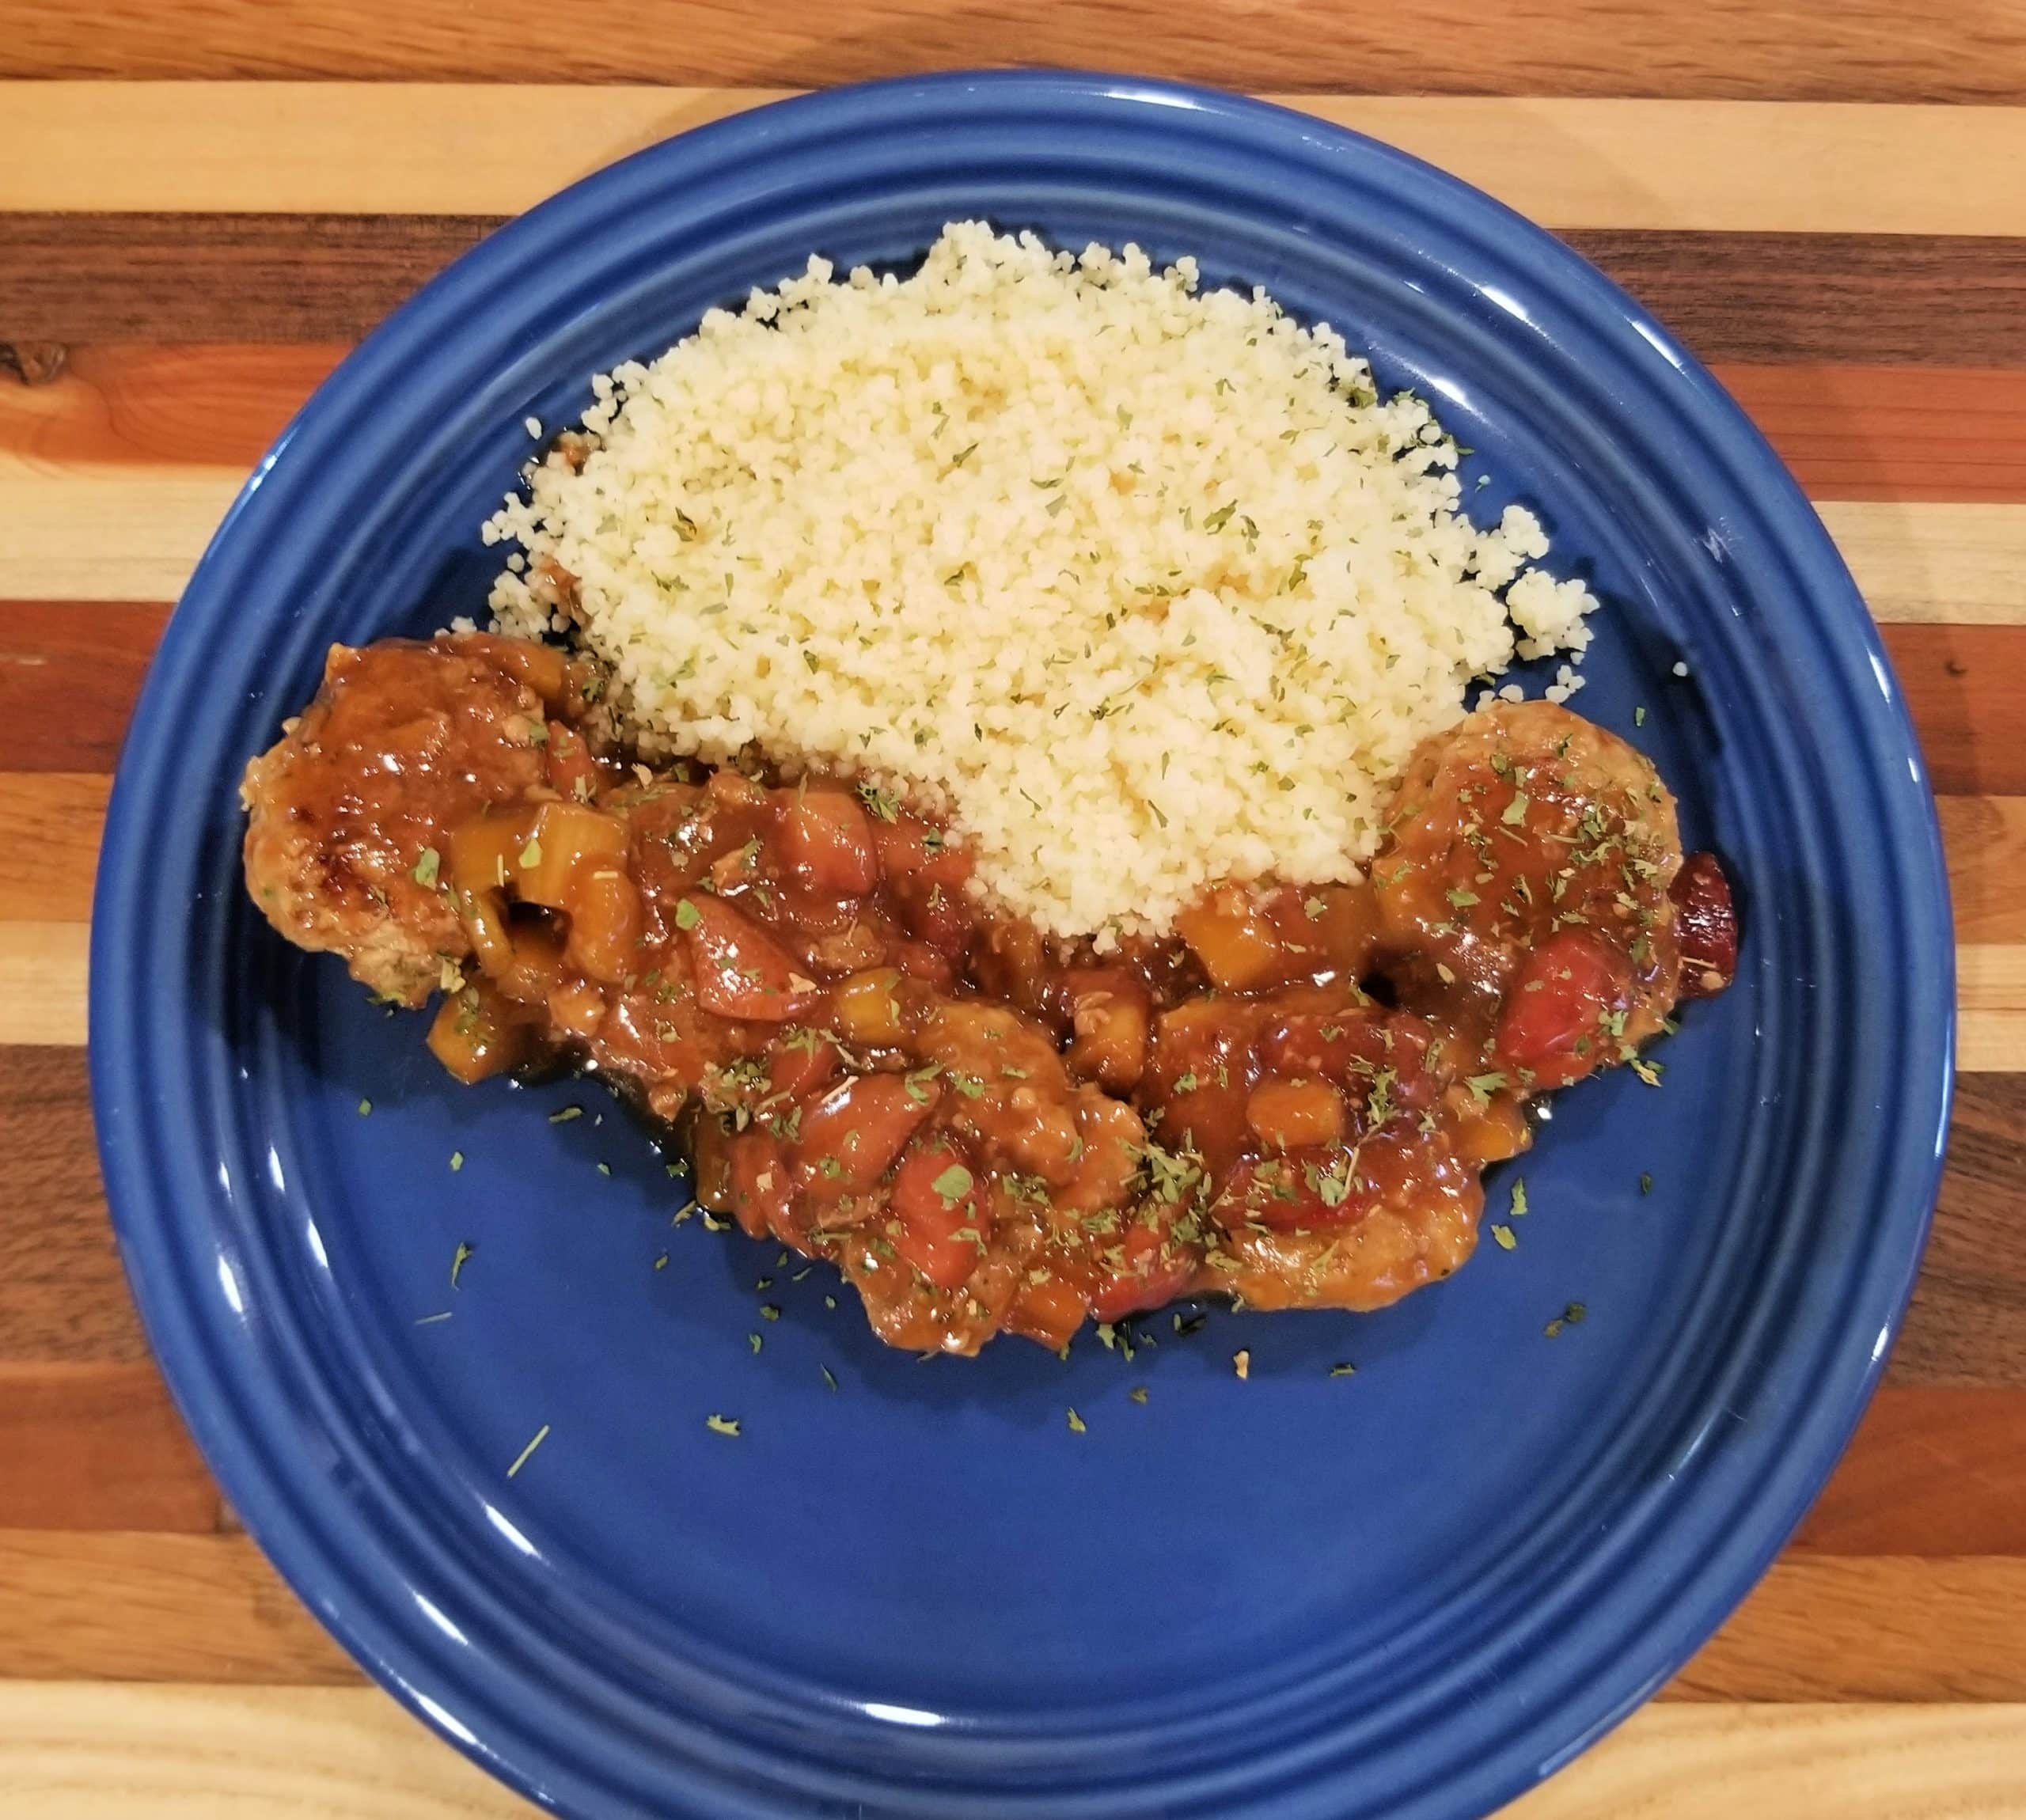 5 meatballs topped by strawberry rhubarb sauce on a blue plate with a serving of couscous